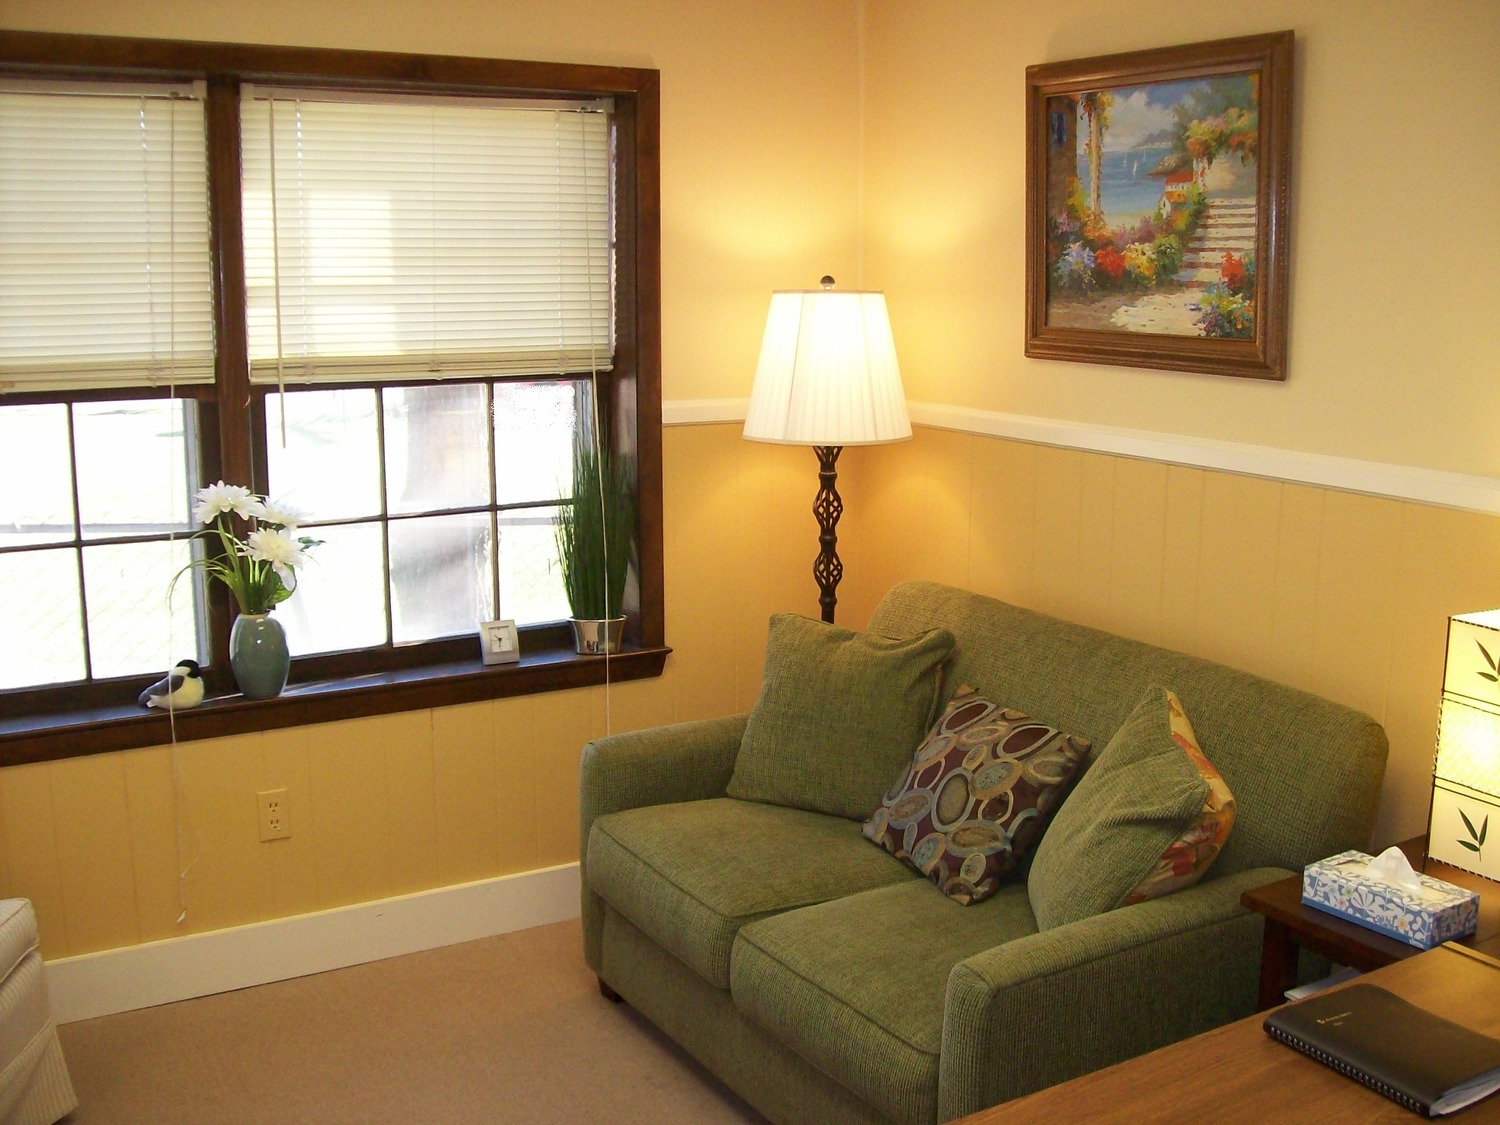 Gallery Photo of Counseling Room